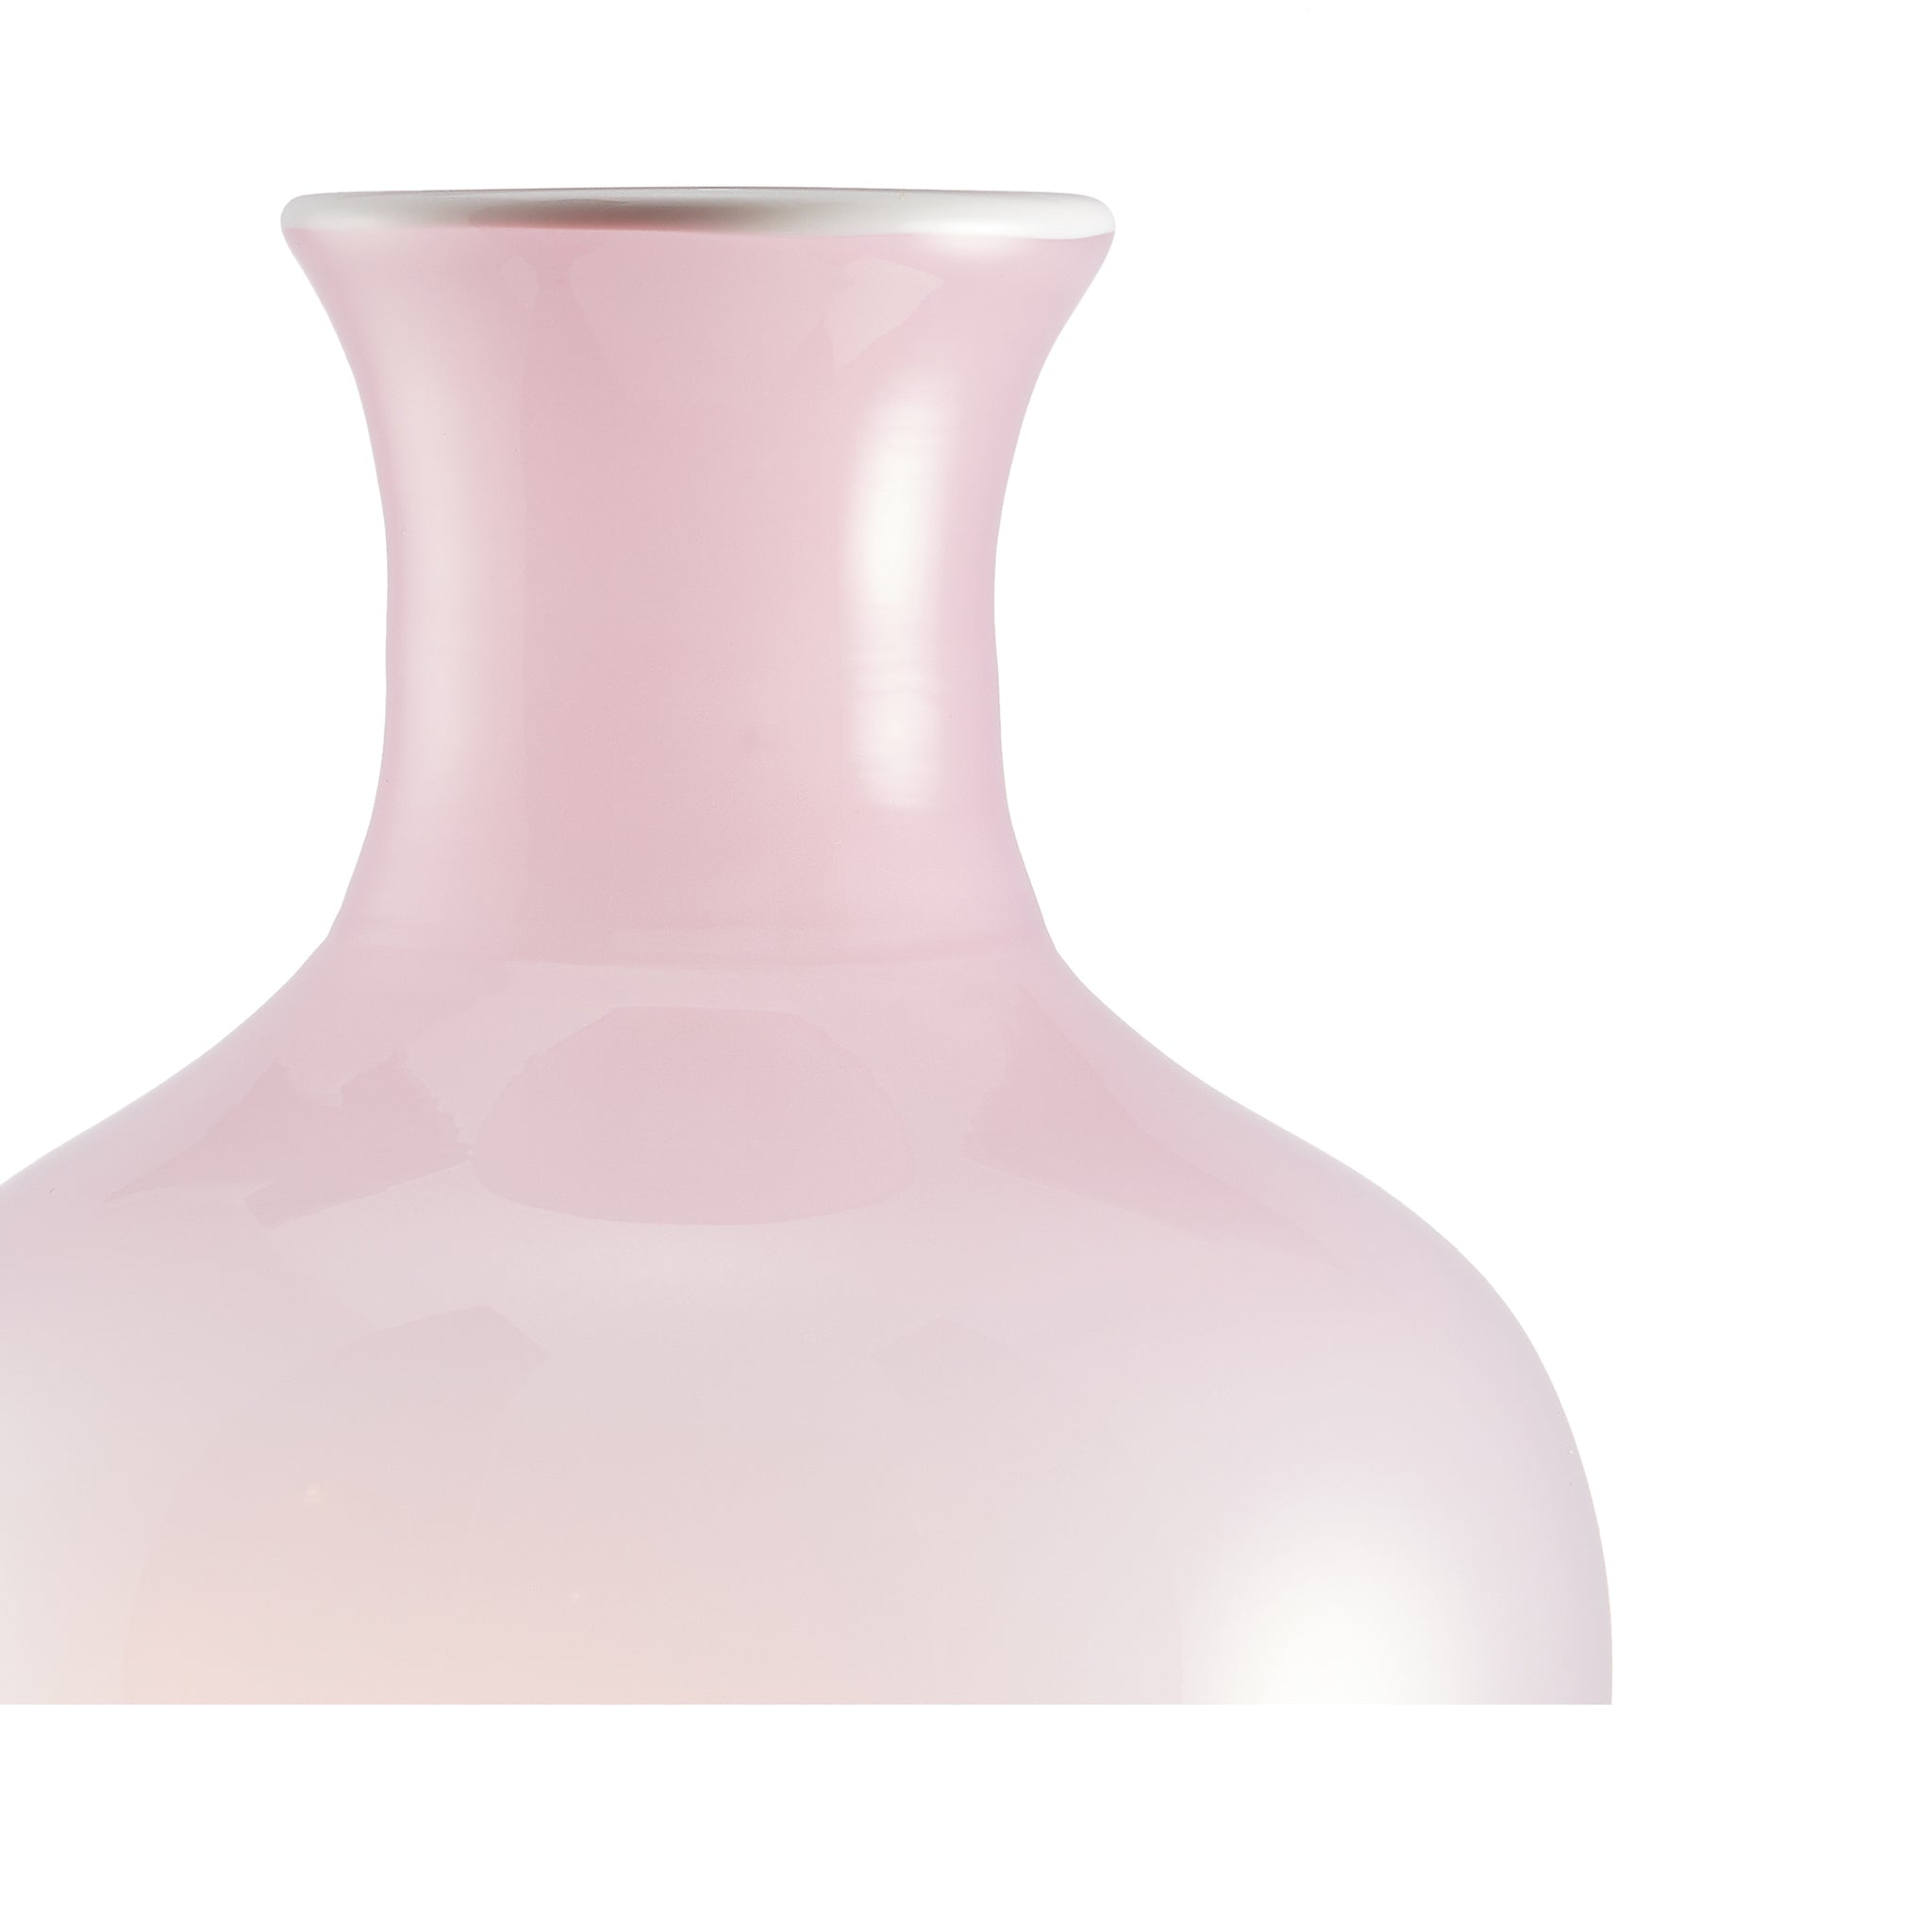 Handblown Glass Bumba Bedside Carafe and Glass Set in Rose Pink, 0.5L